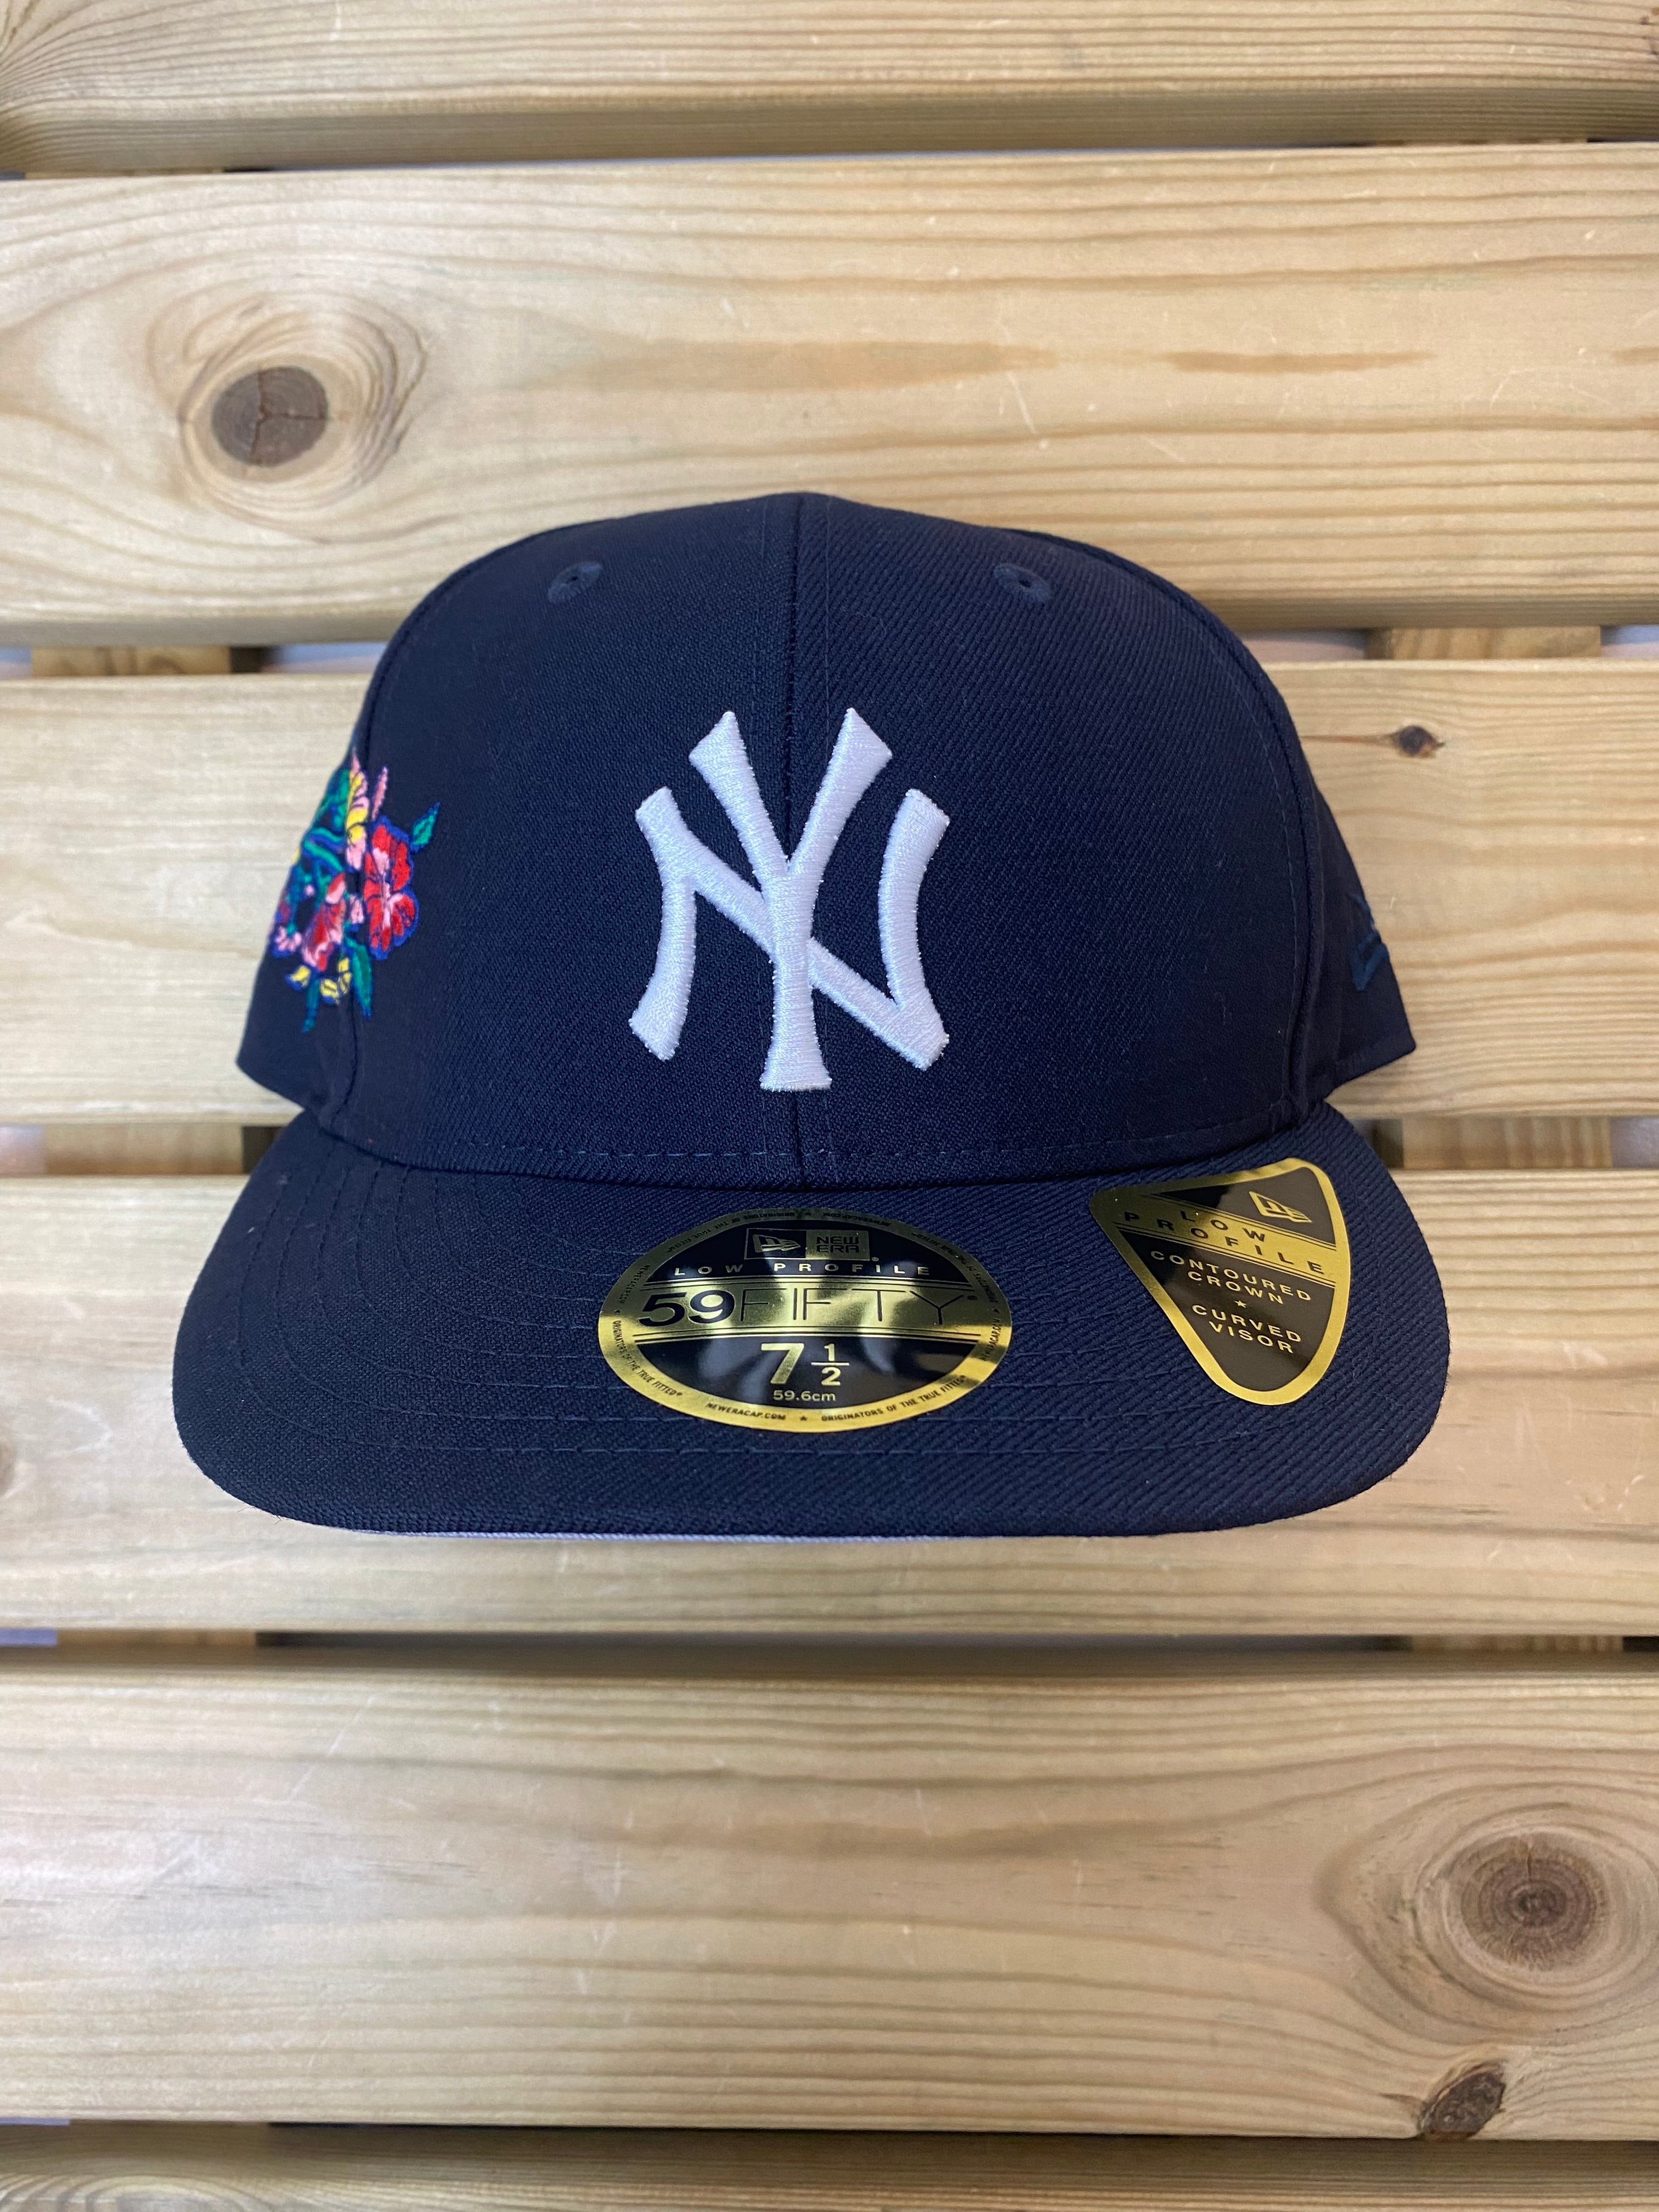 KITH × NEW ERA NEW YORK YANKEES FLORAL LOW CROWN FITTED CAP 7 1/2 ...